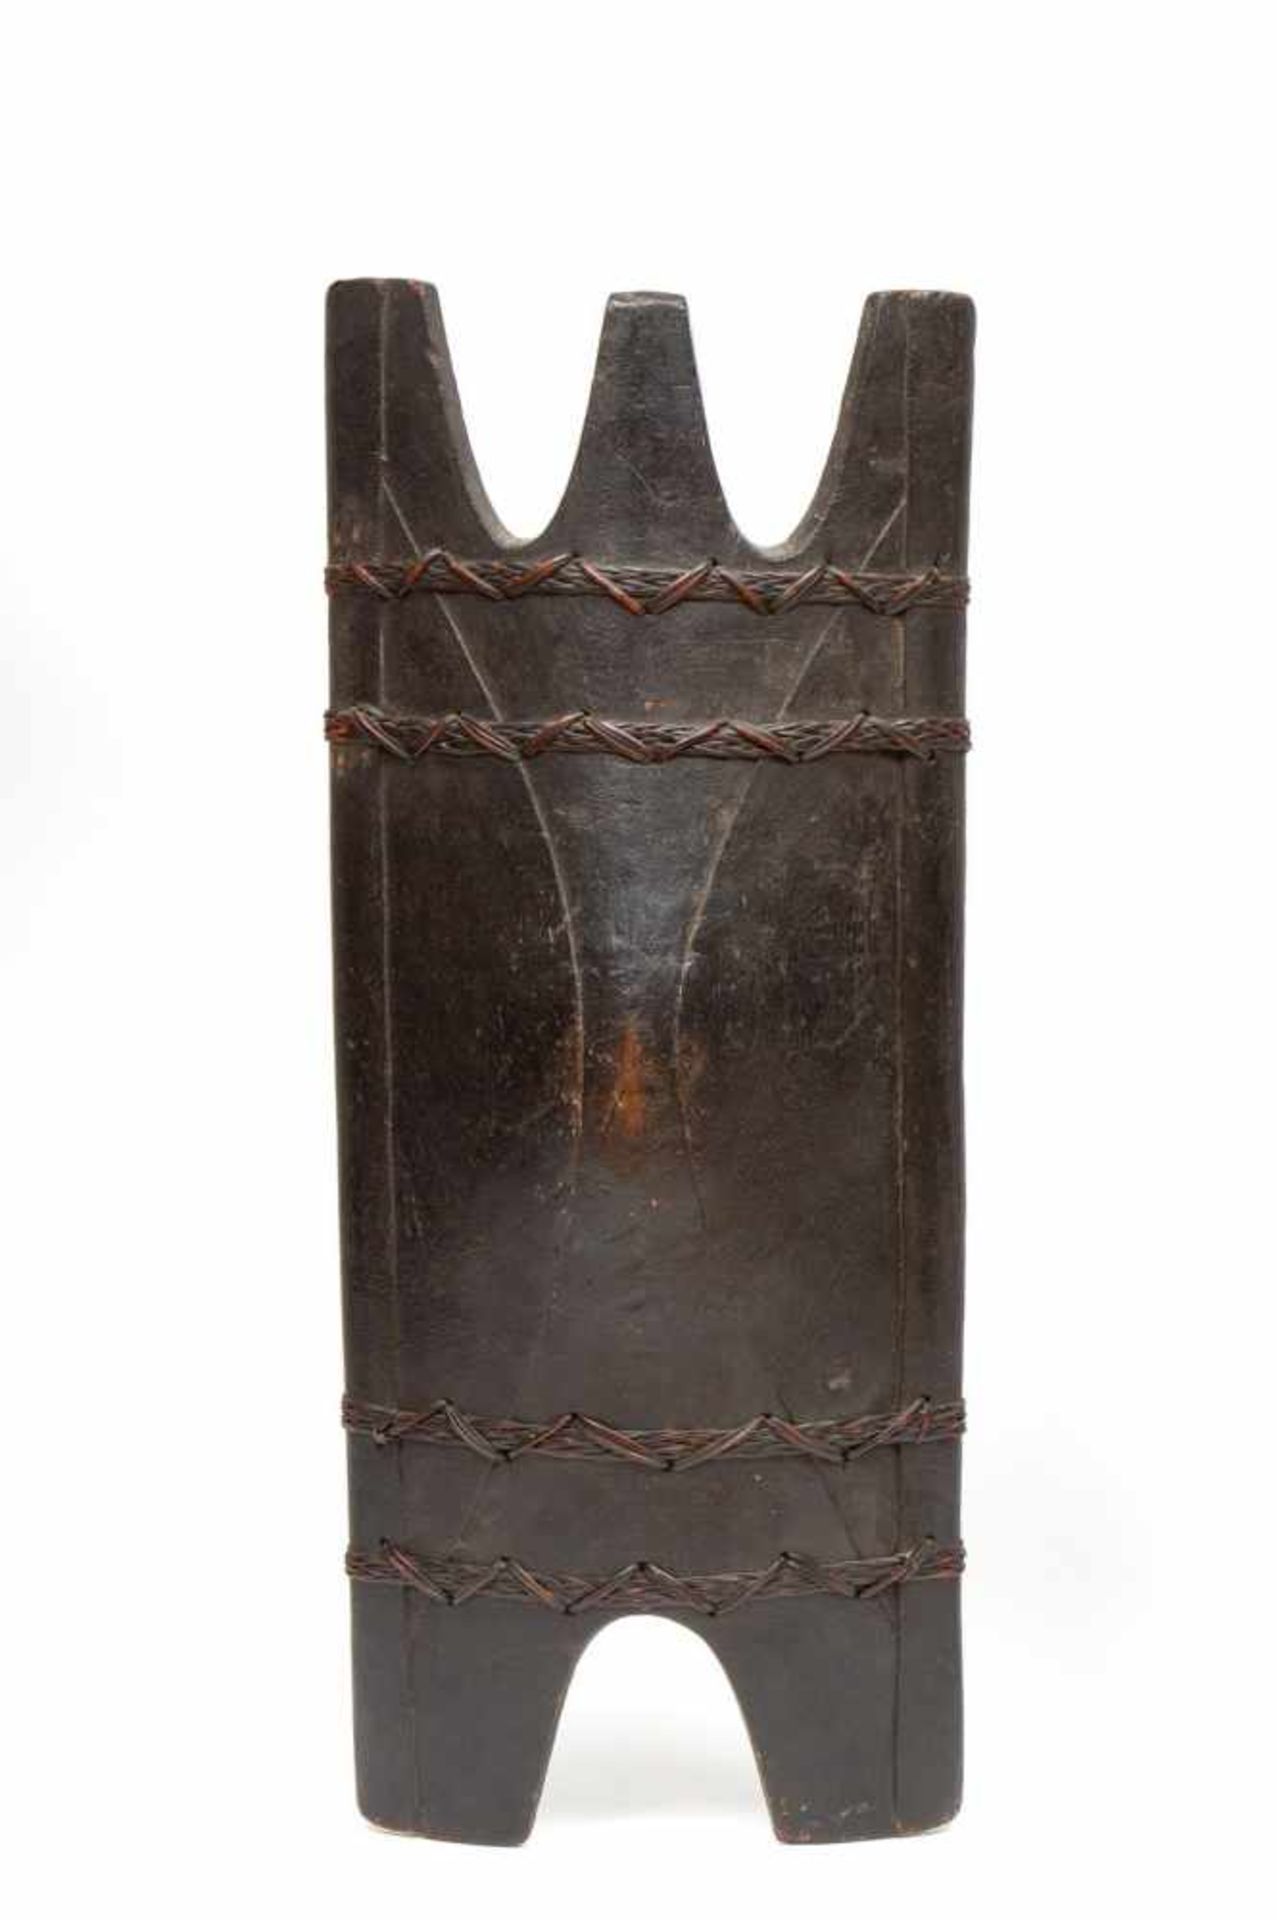 Philippines, Bontoc, hunting shield, calata, late 19th century,the bulbous central body with three